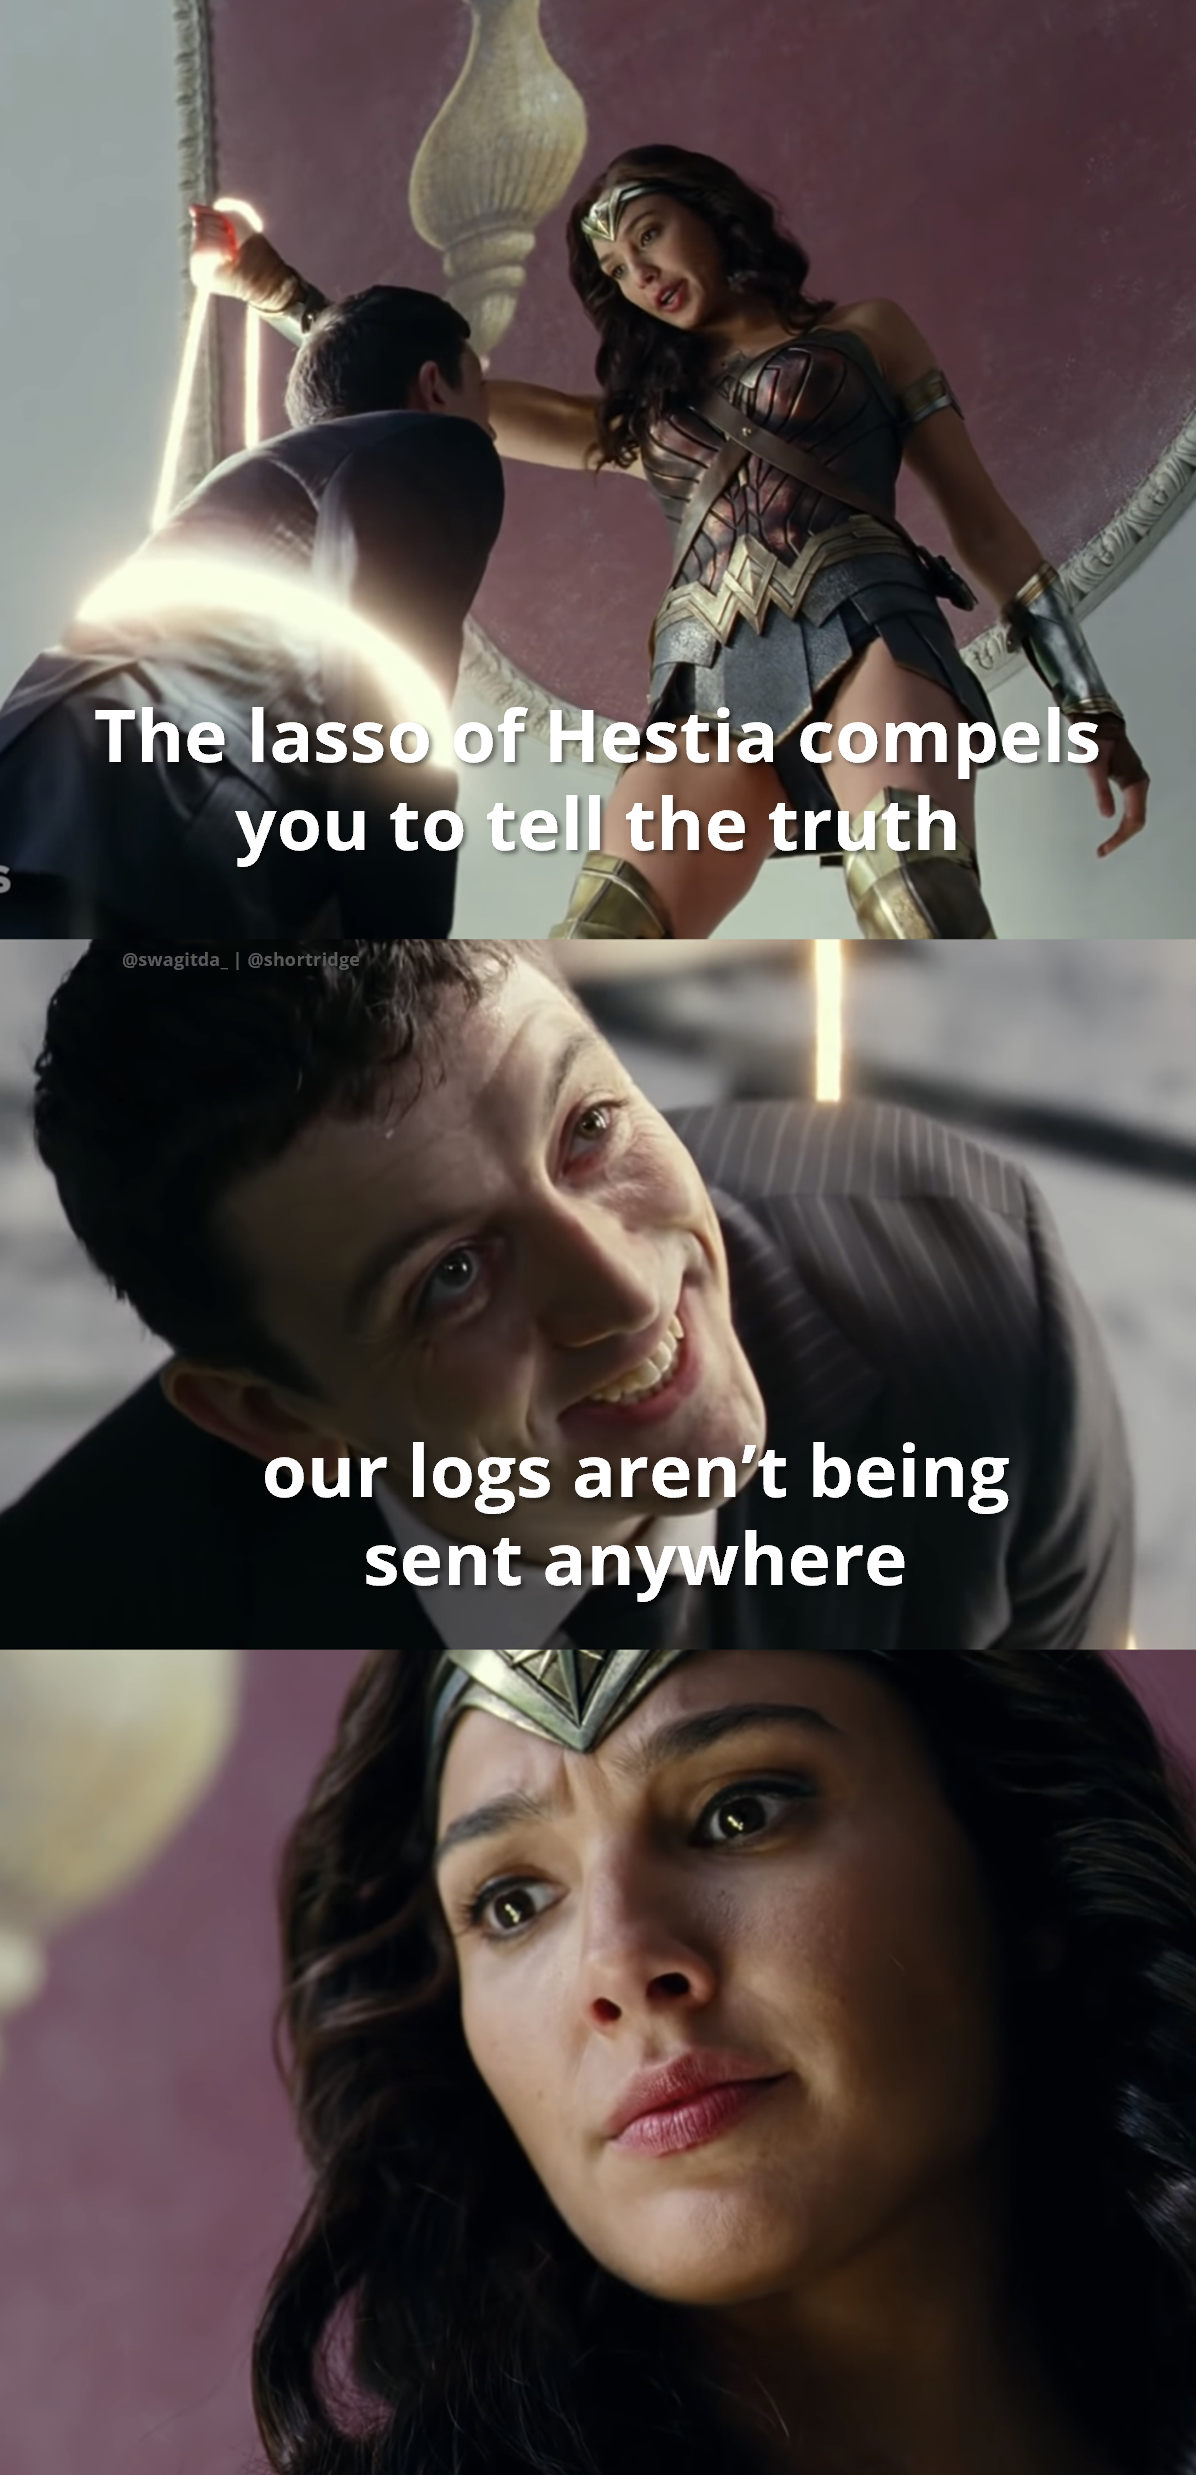 A meme from a Wonder Woman movie. In the first panel, she uses her lasso to constrain a man; she says: the lasso of Hestia compels you to tell the truth. In the second panel, the man grins; he says: our logs aren&rsquo;t being sent anywhere. In reaction, in the third panel, Wonder Woman looks thoroughly disturbed. 